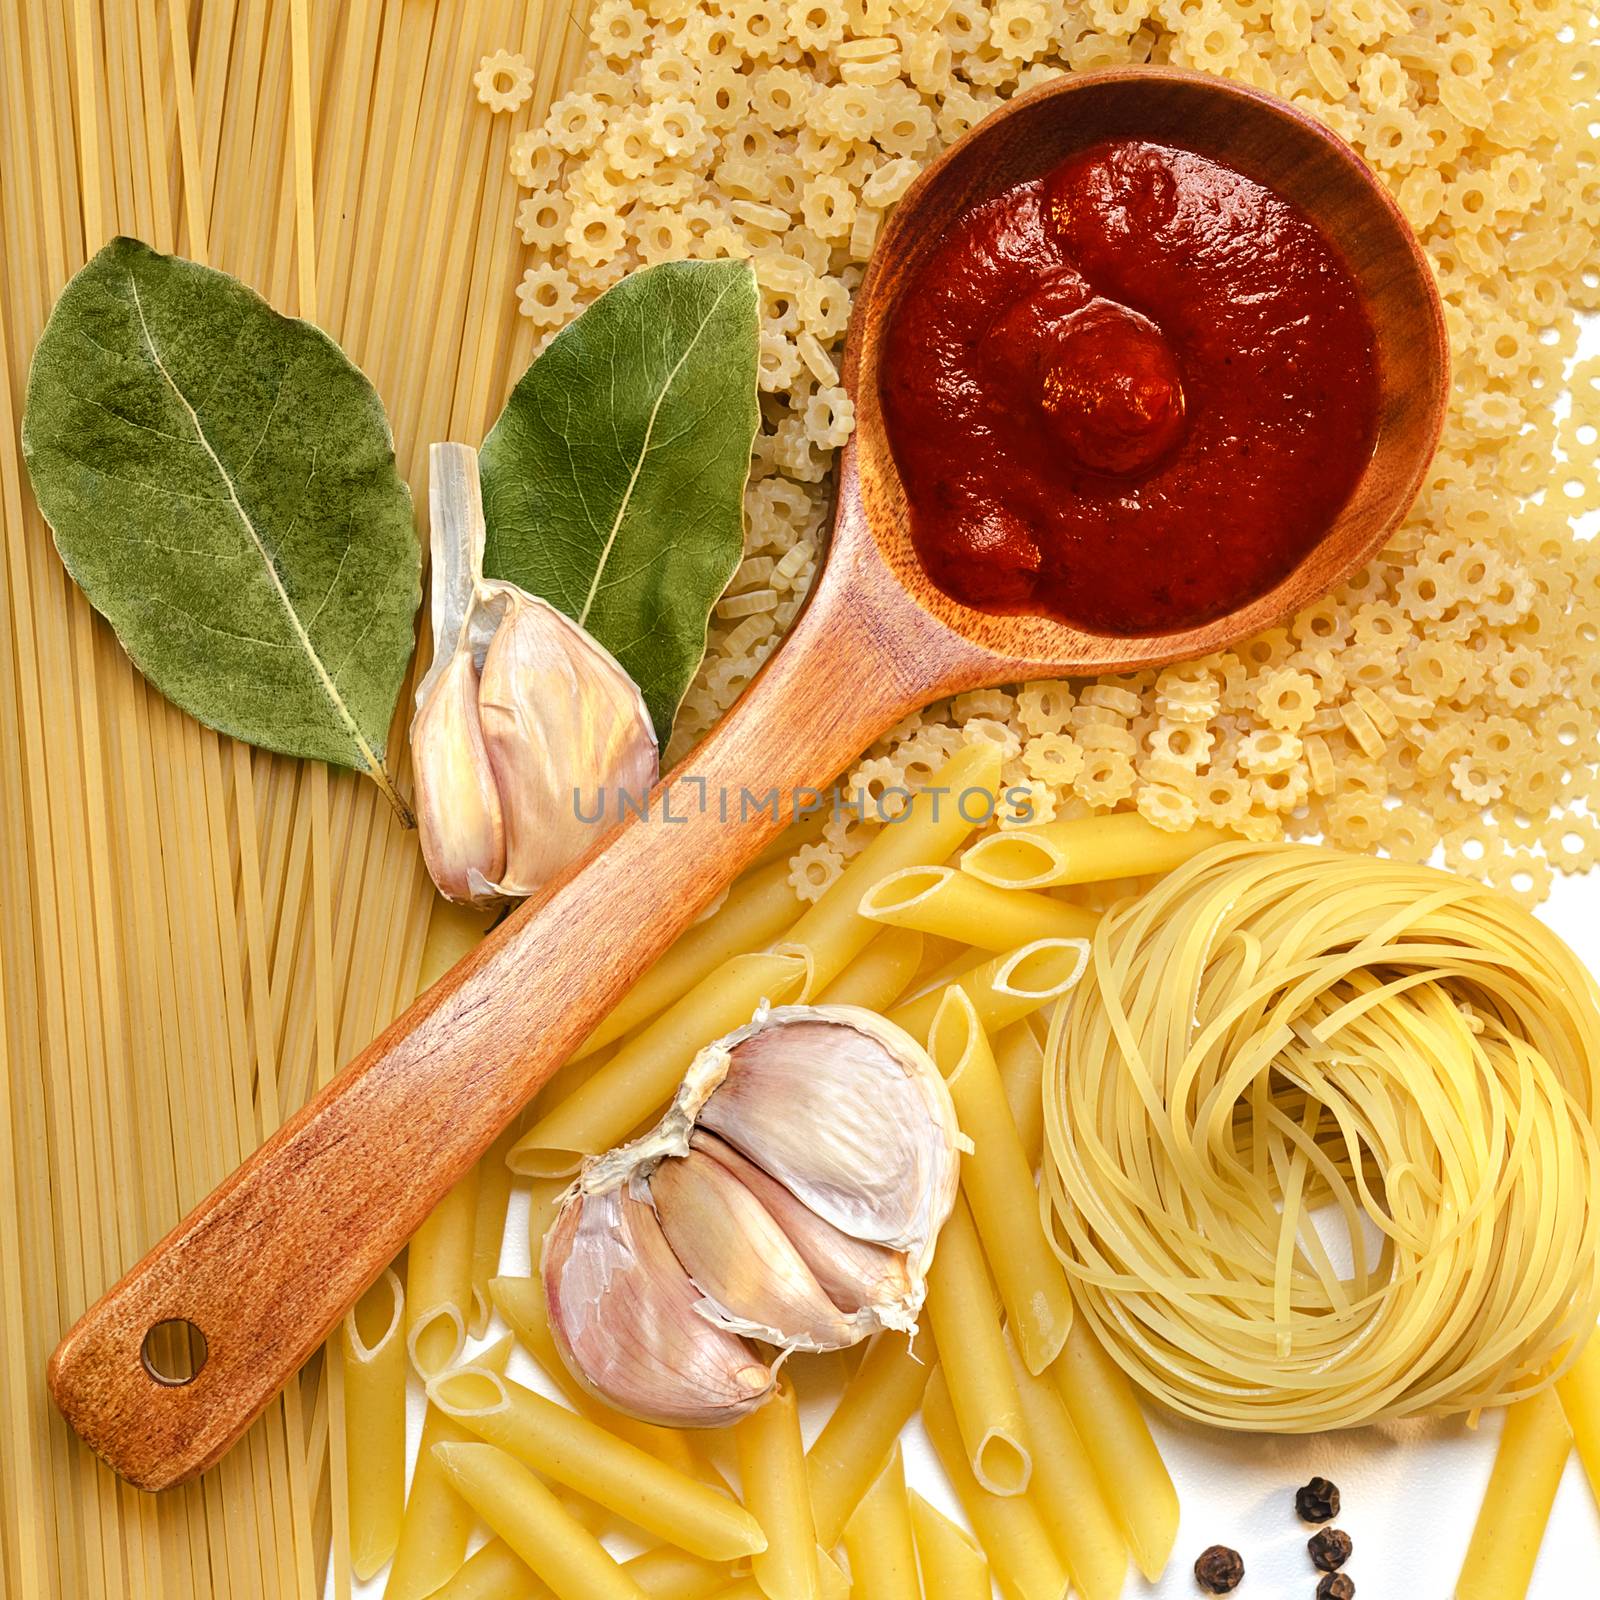 The range of dried pasta, ketchup and spices on top by Gaina